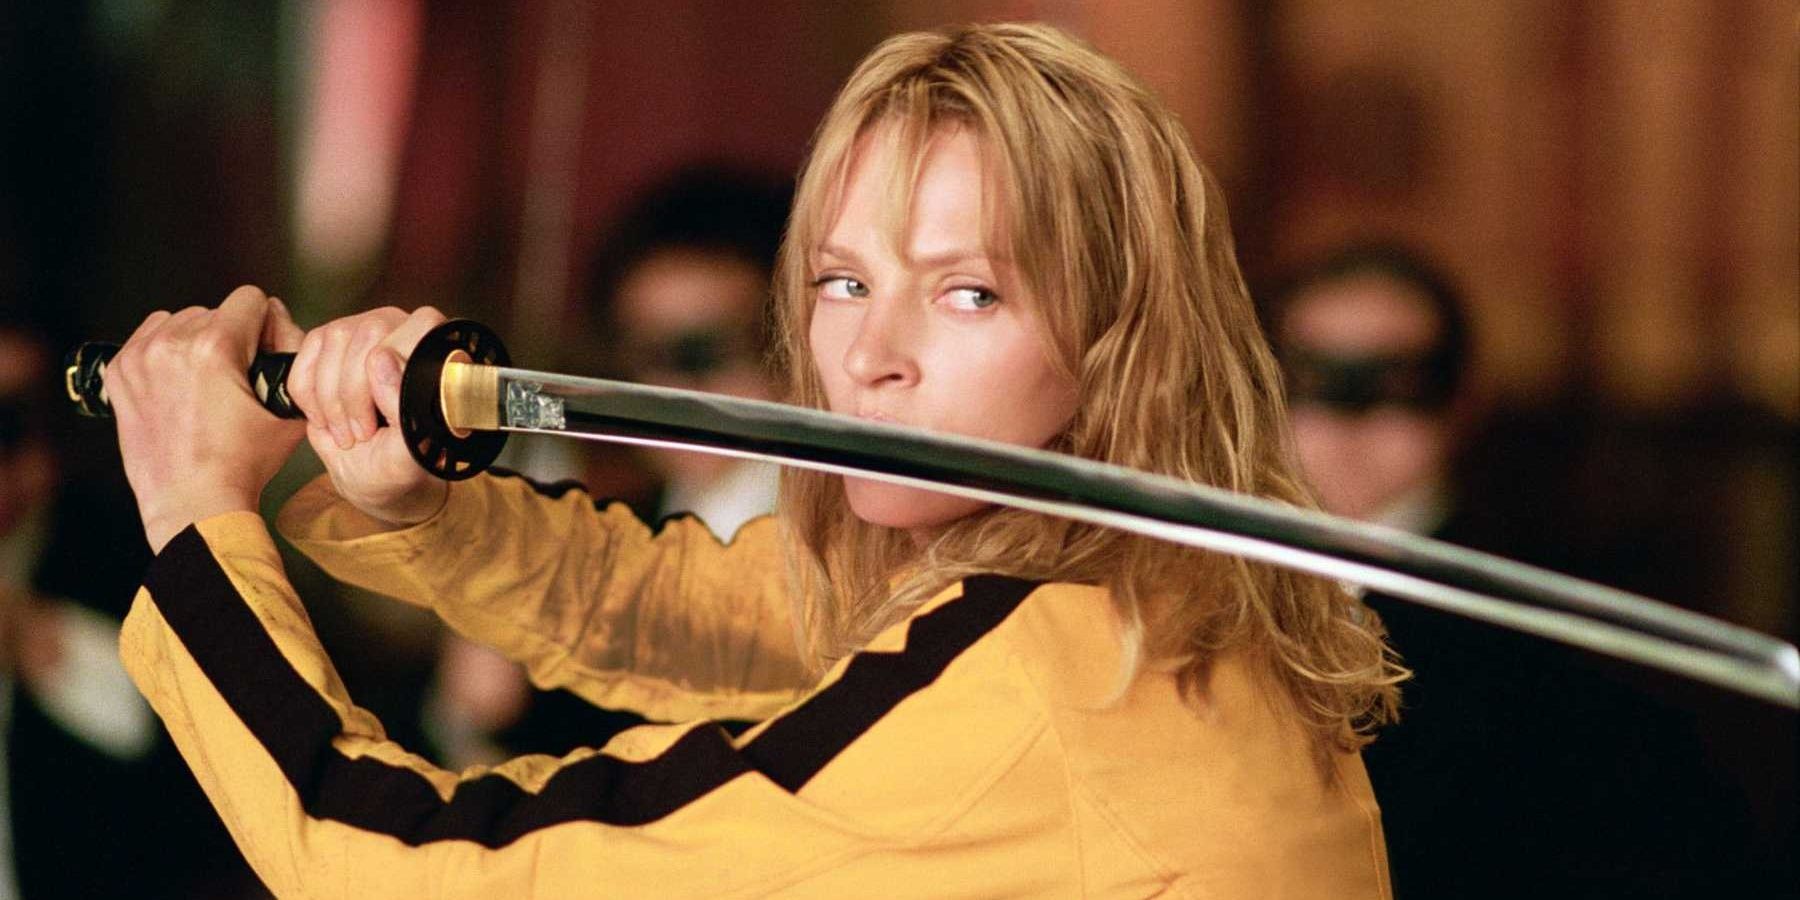 15 Excellent Action Movies With Female Leads You Can Stream Right Now